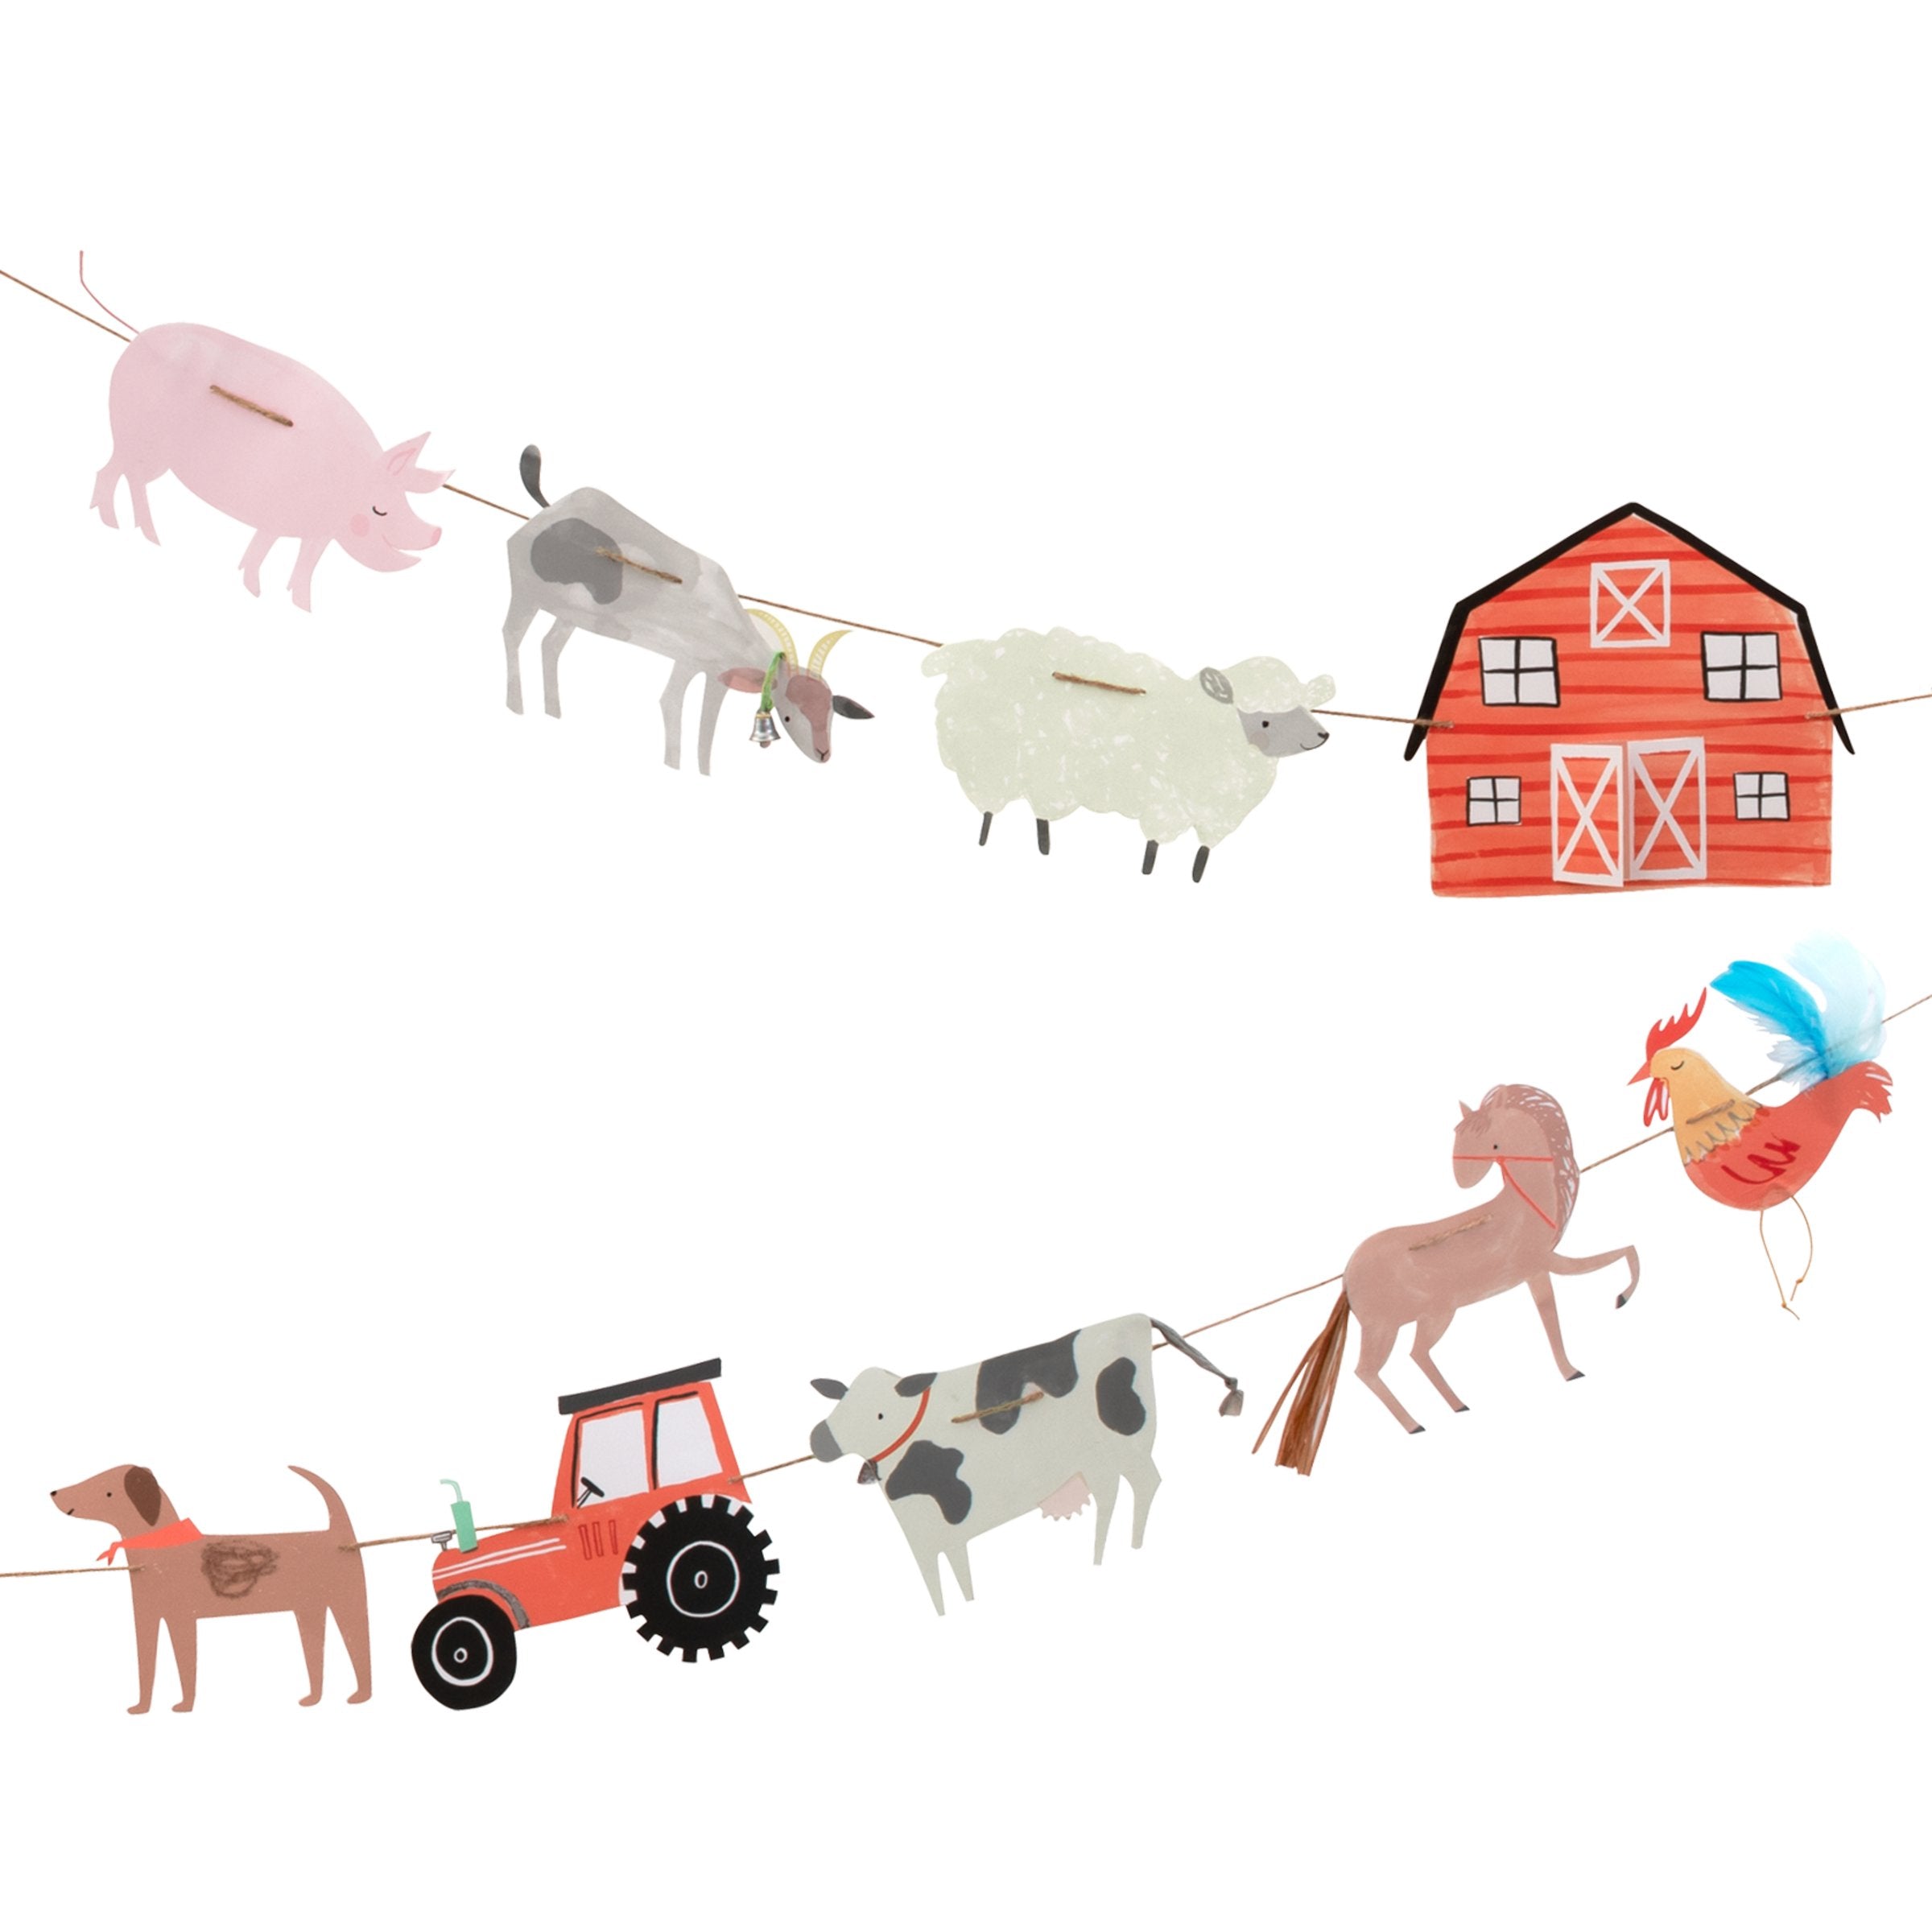 Our long party garland, featuring a tractor and farmyard animals, is perfect for a farm birthday party.